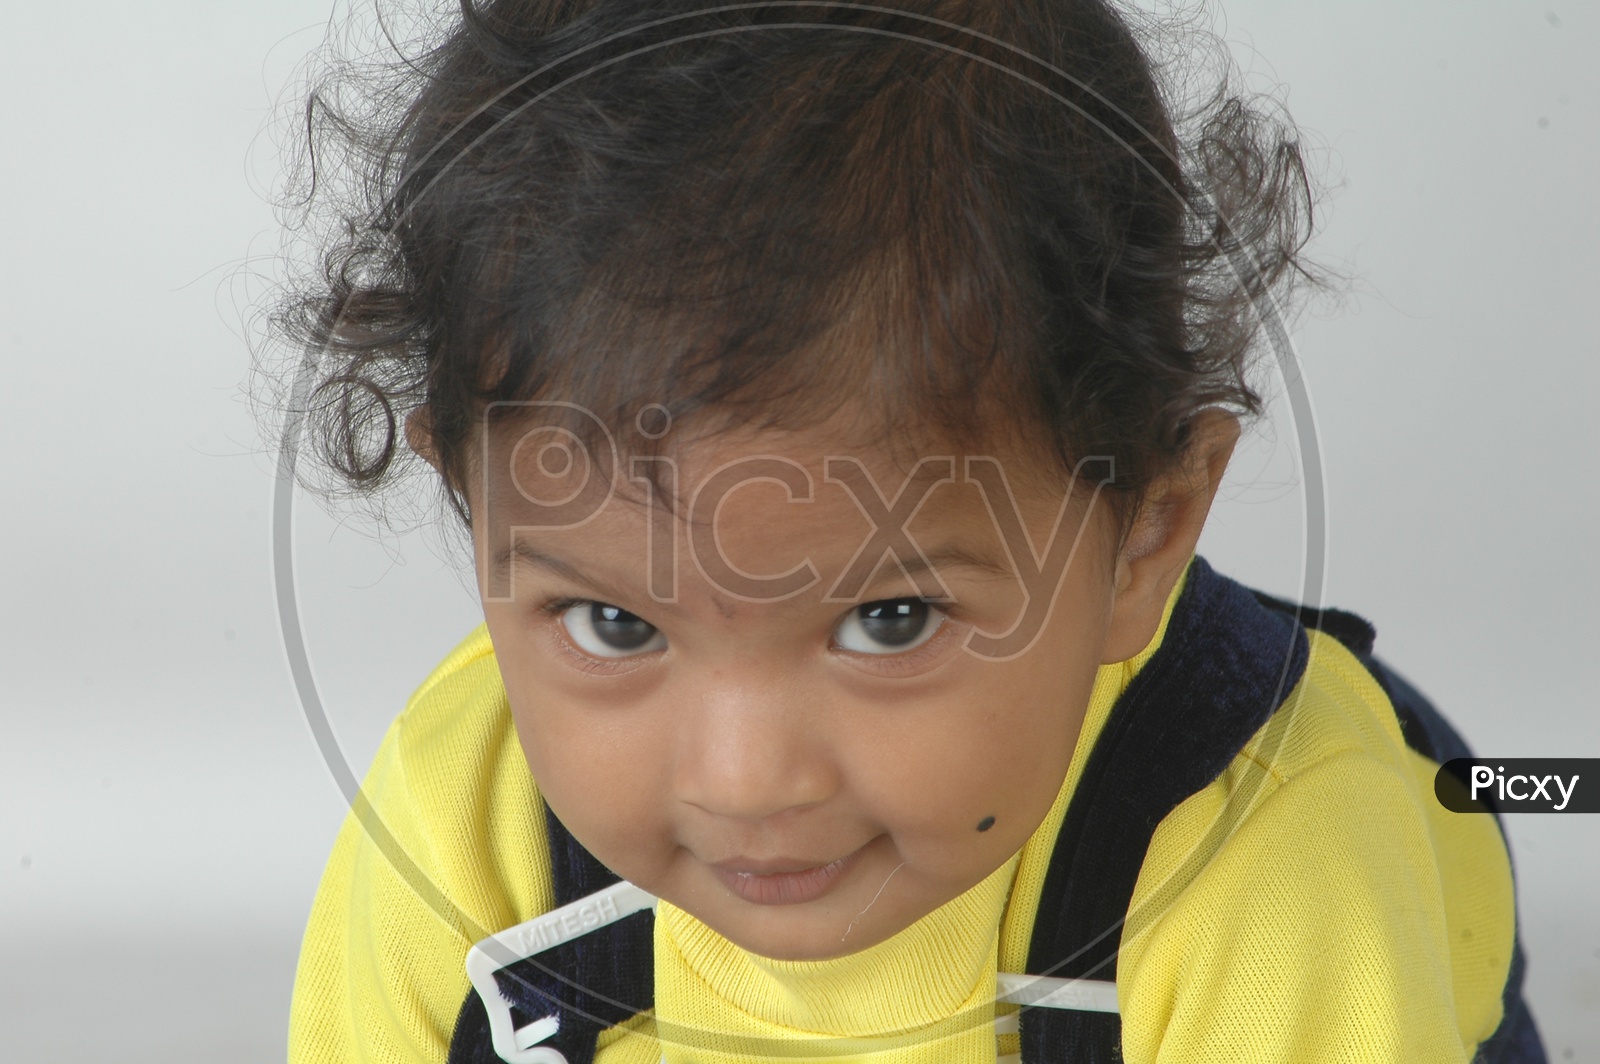 Indian Girl  Child Closeup Shot With Expressions over an Isolated White Background